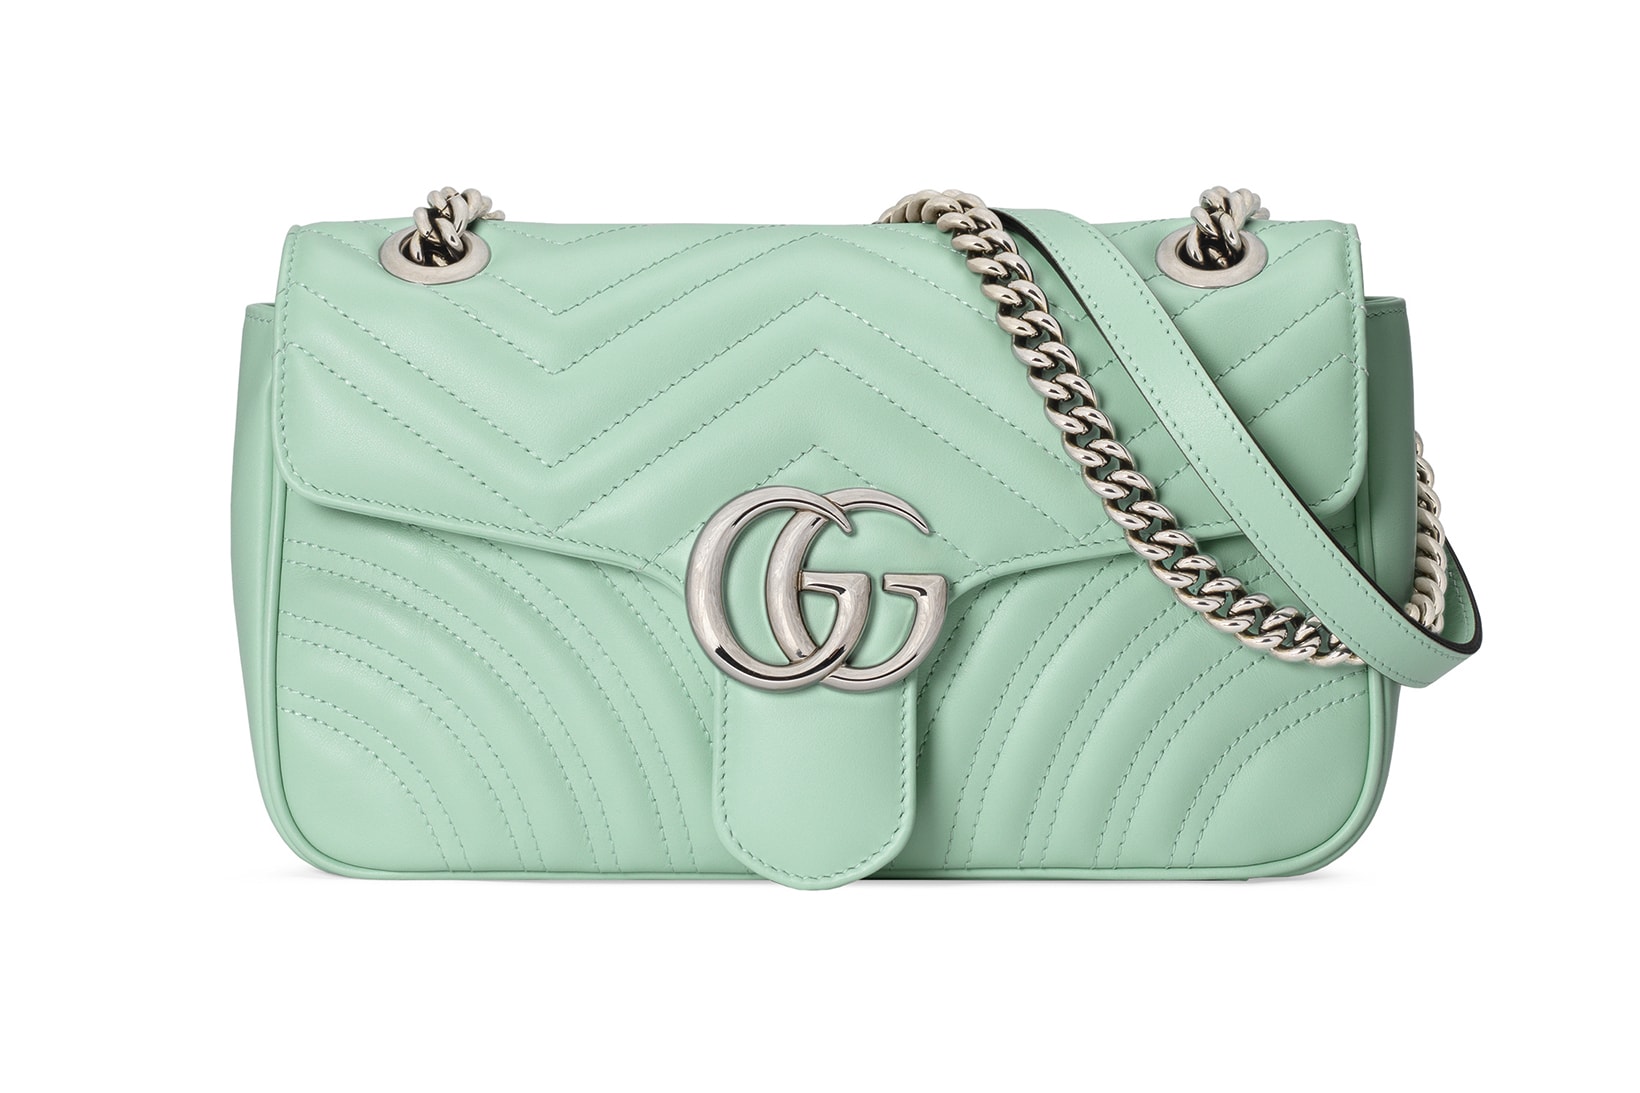 gucci gg marmont 2 0 pre fall collection pastel pink green yellow blue alessandro michele mothers day